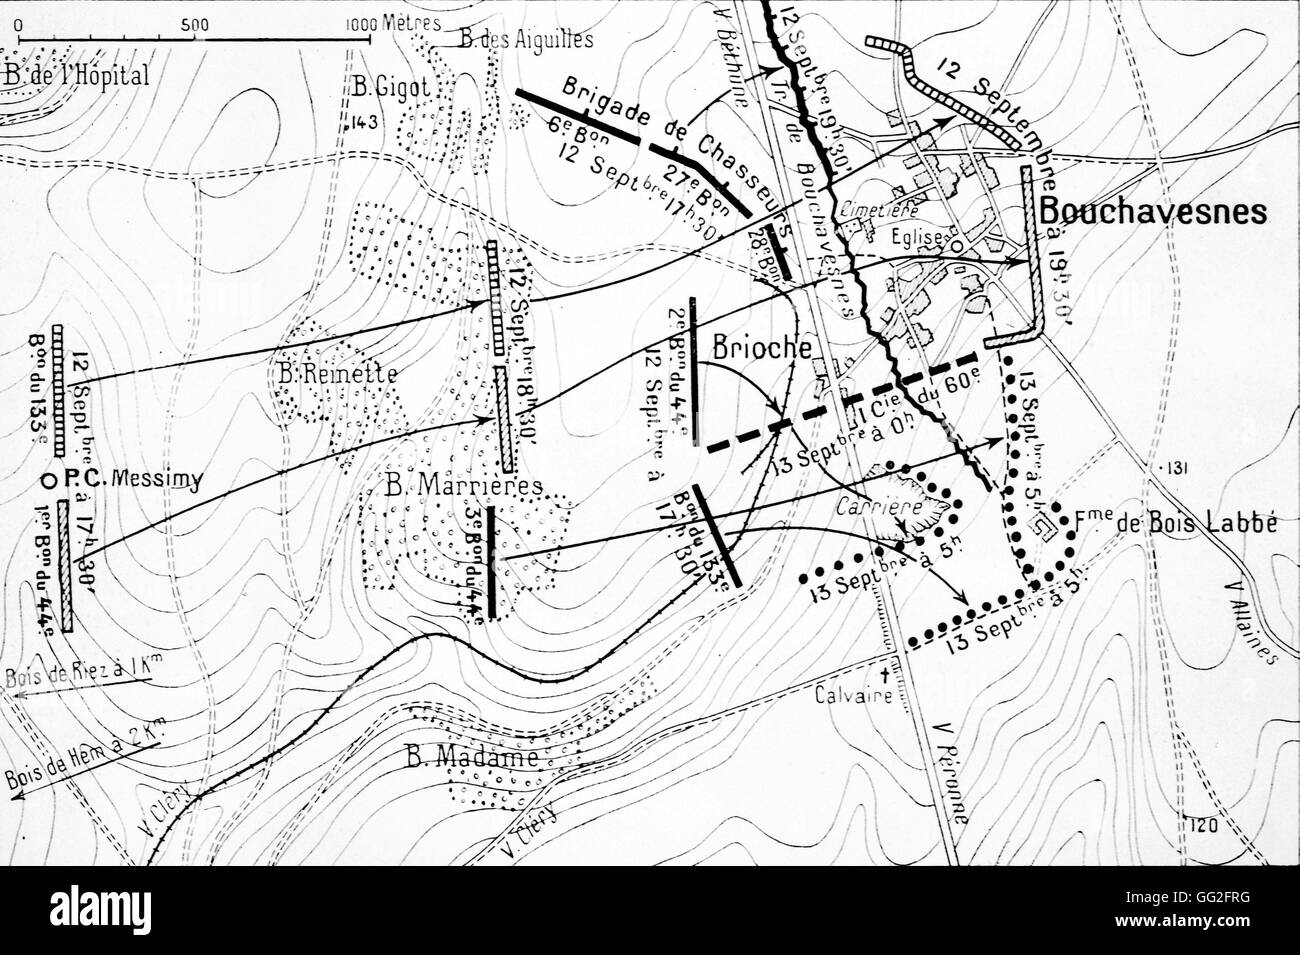 First World War. Sketch of the action of the 12th and 13th September with the advance of various units during the Battle of the Somme. Stock Photo